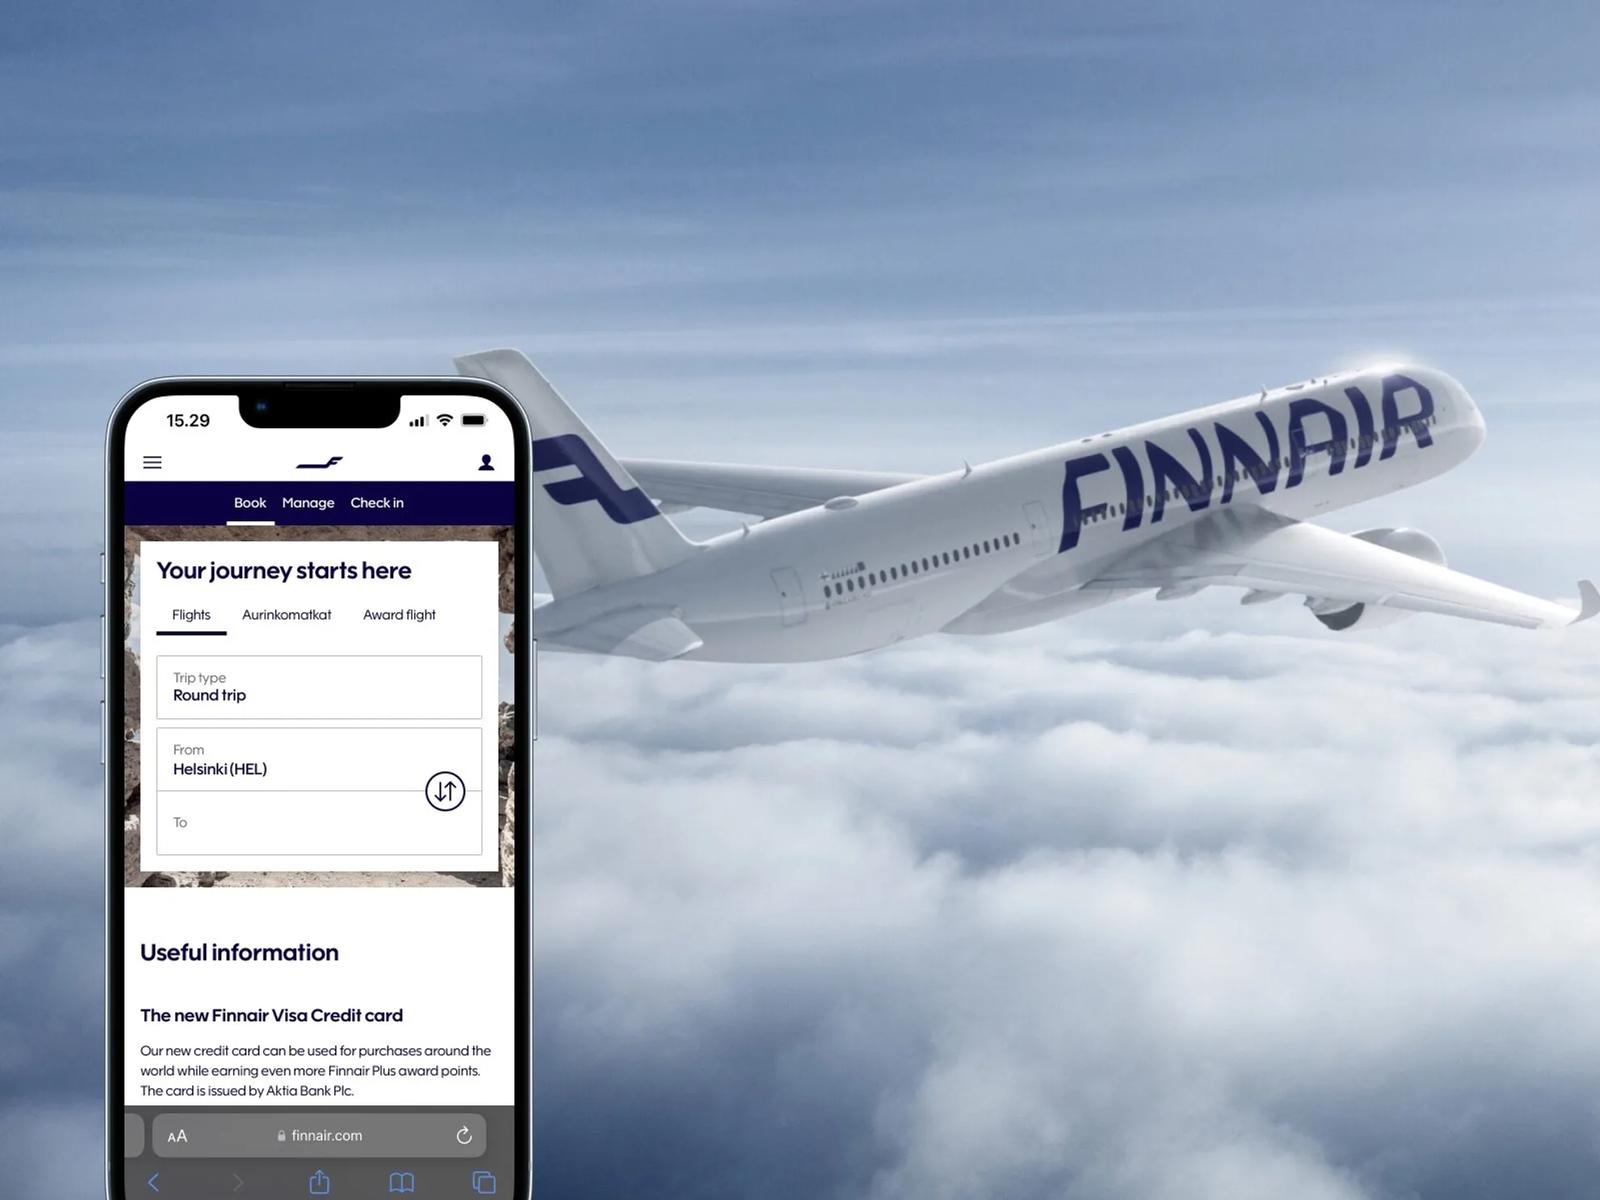 Leading Finnair to new heights